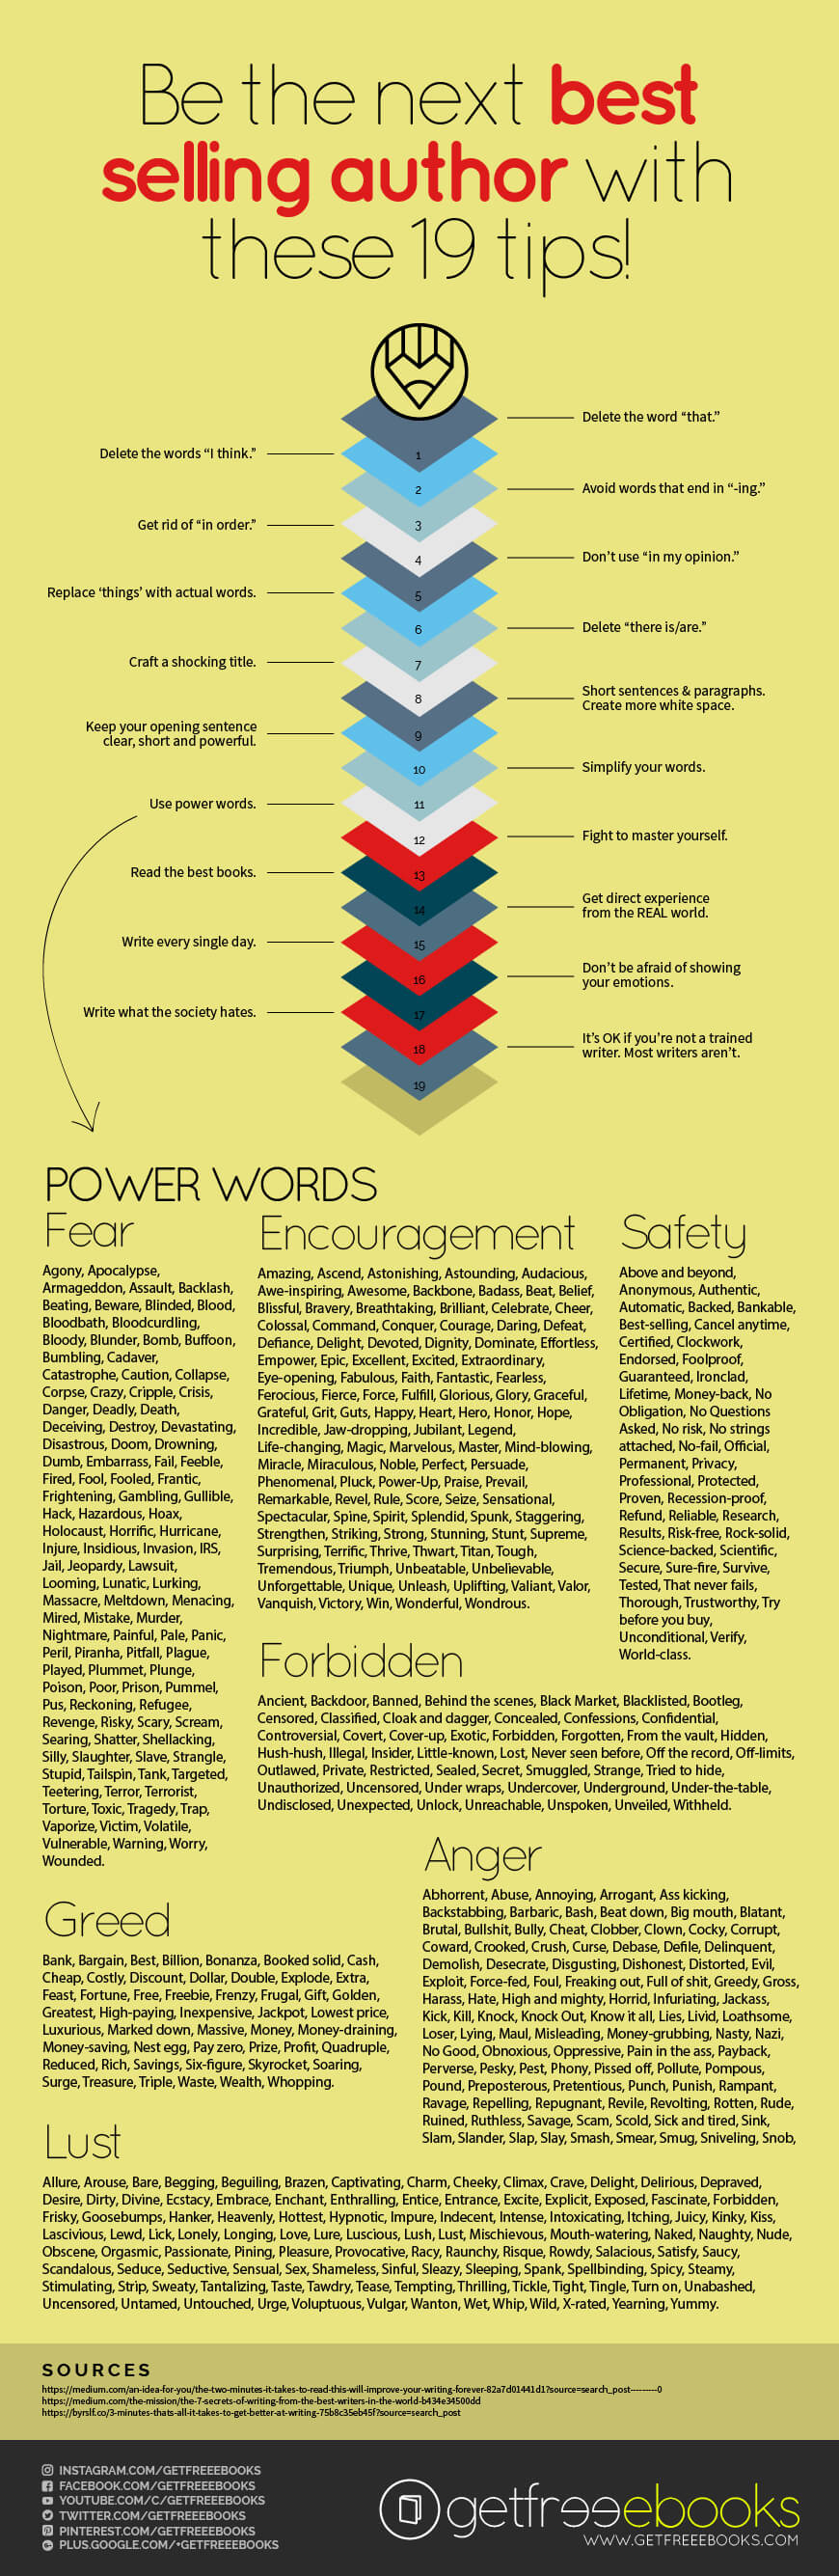 Tools of Titans by Tim Ferriss - Book Summary Infographic